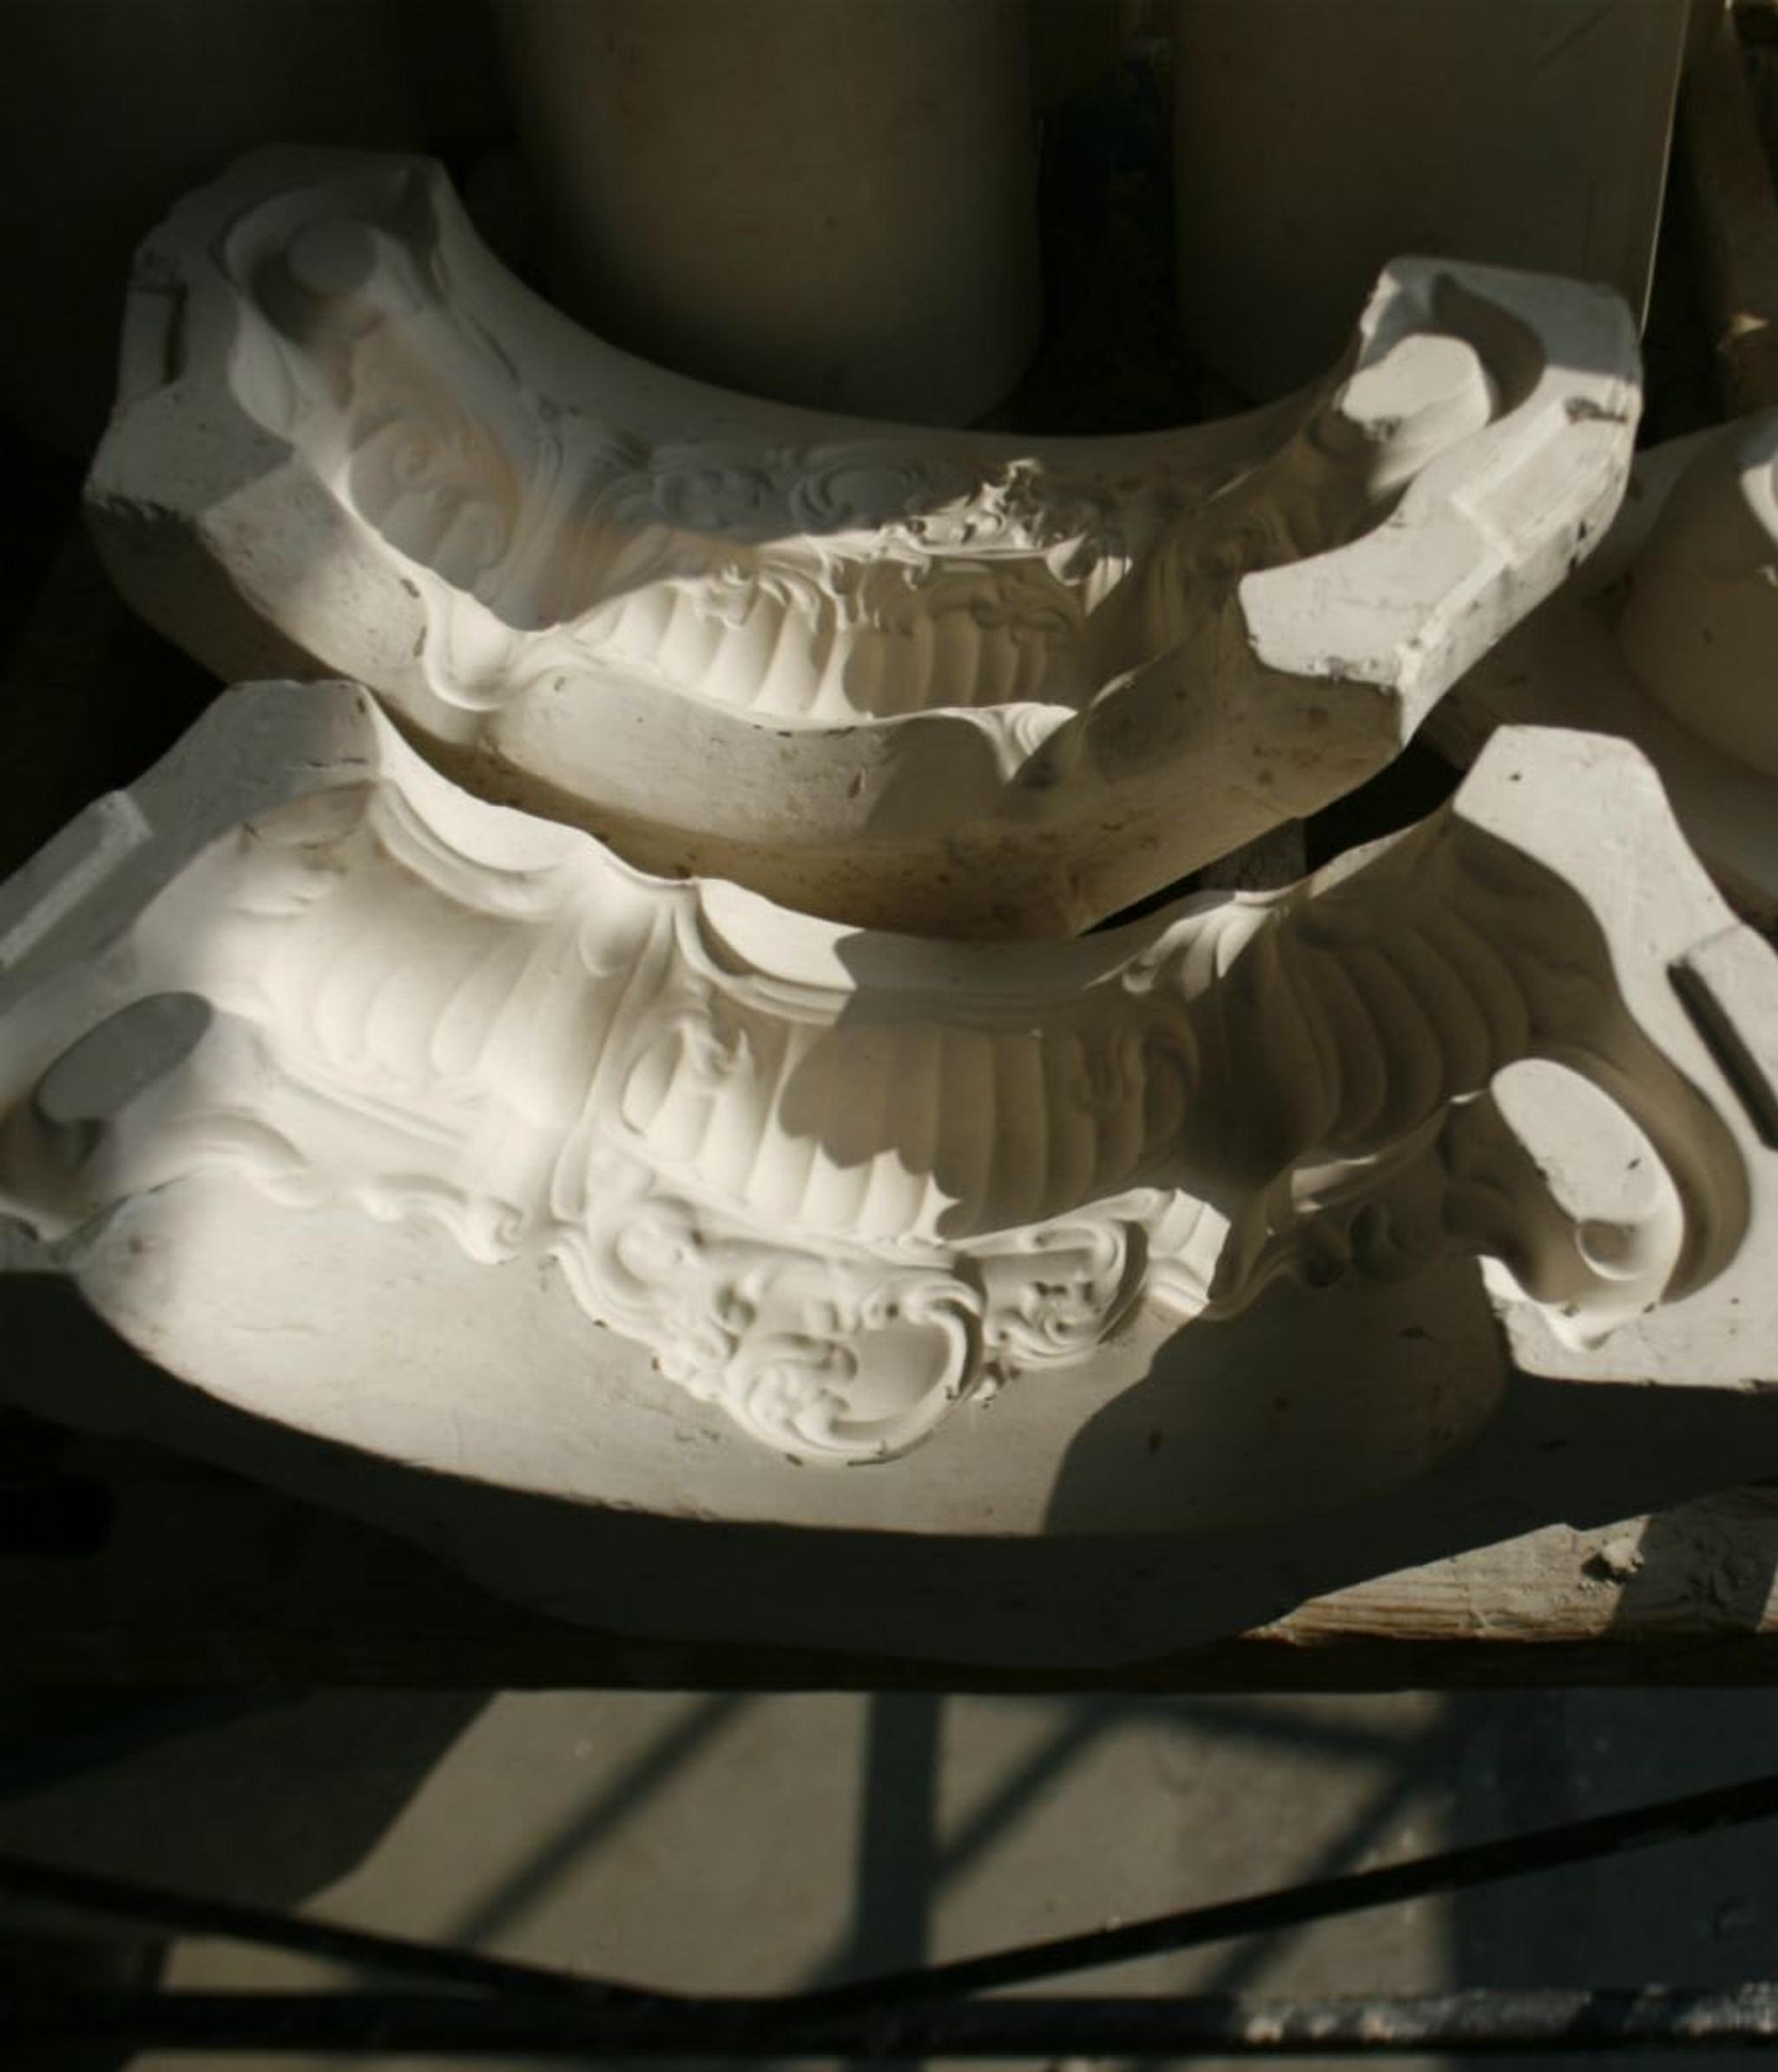 Paolo Polloniato mold of one of his Baroque vessels.